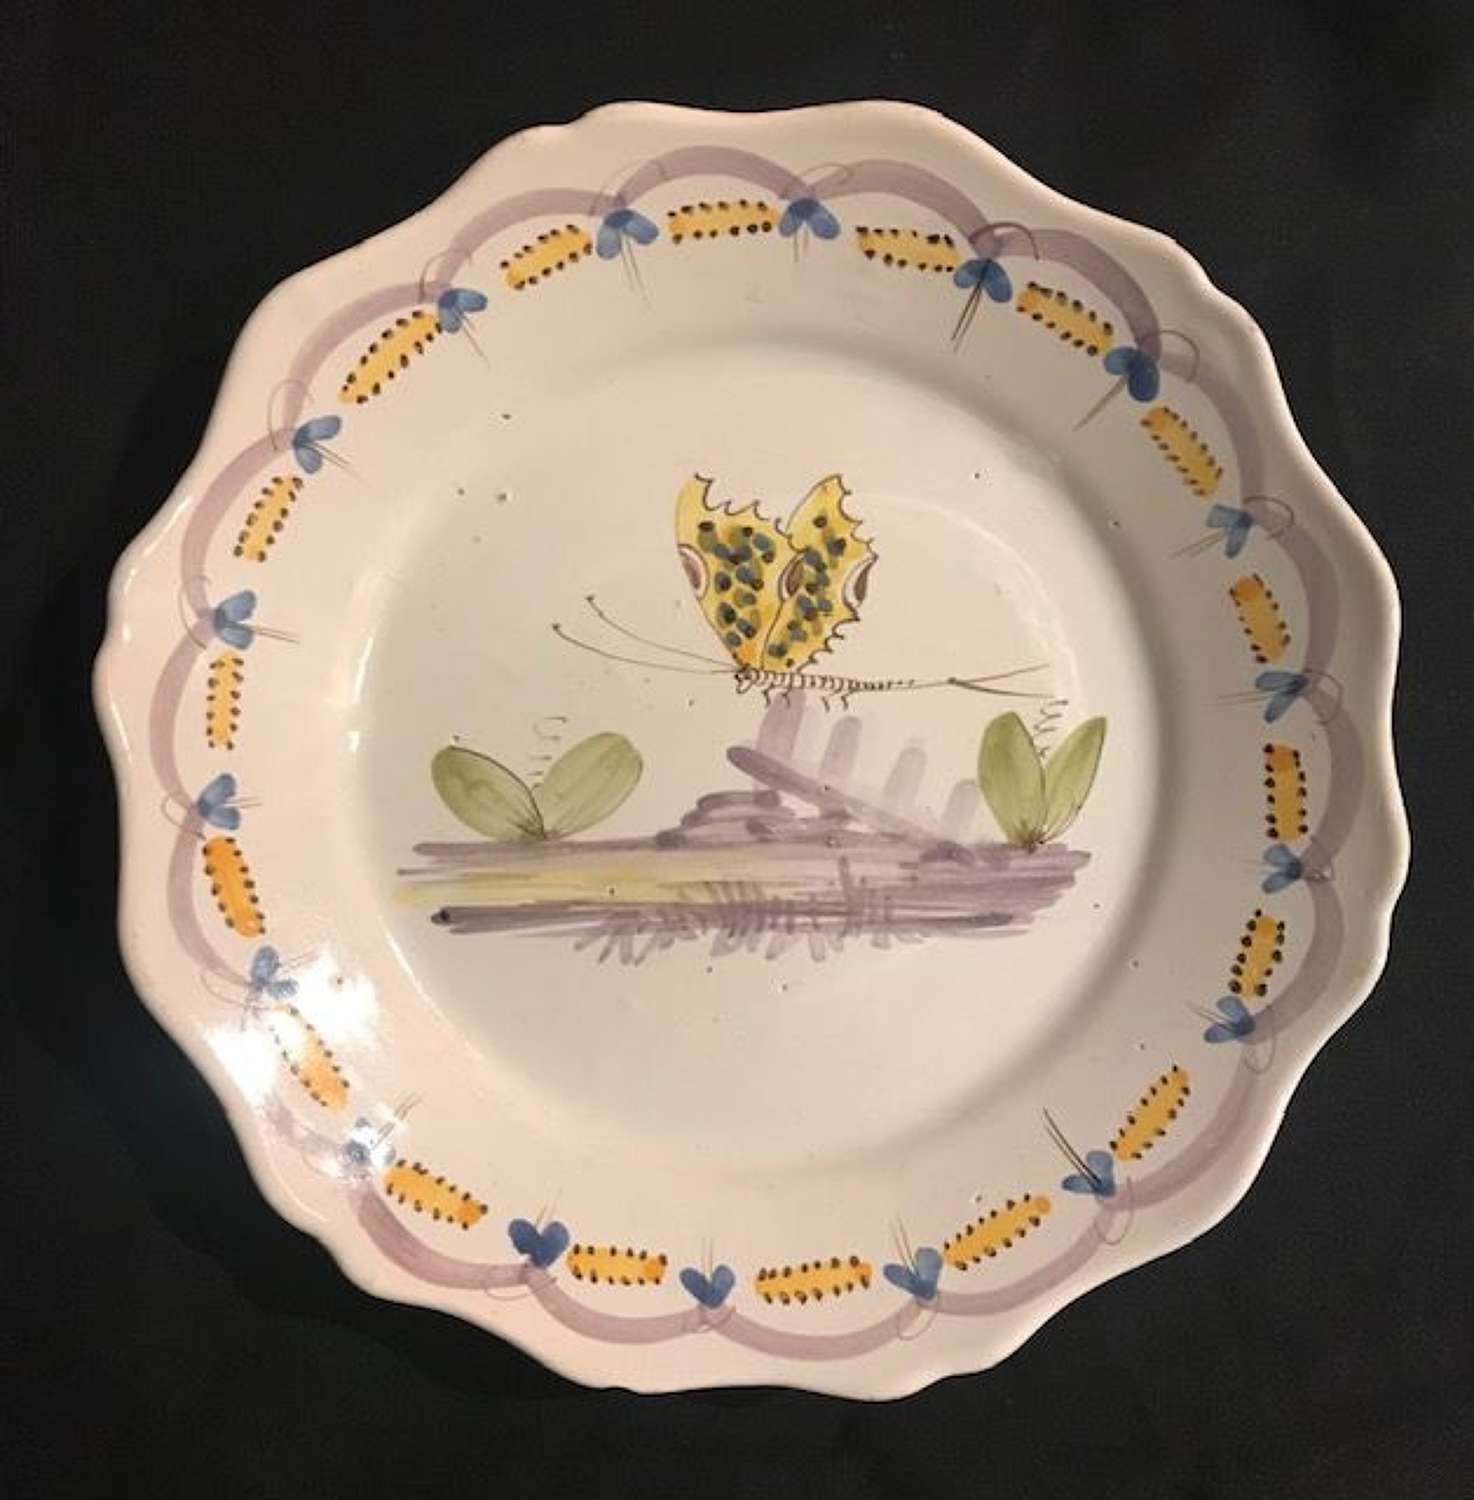 18th century French faience plate with Butterfly